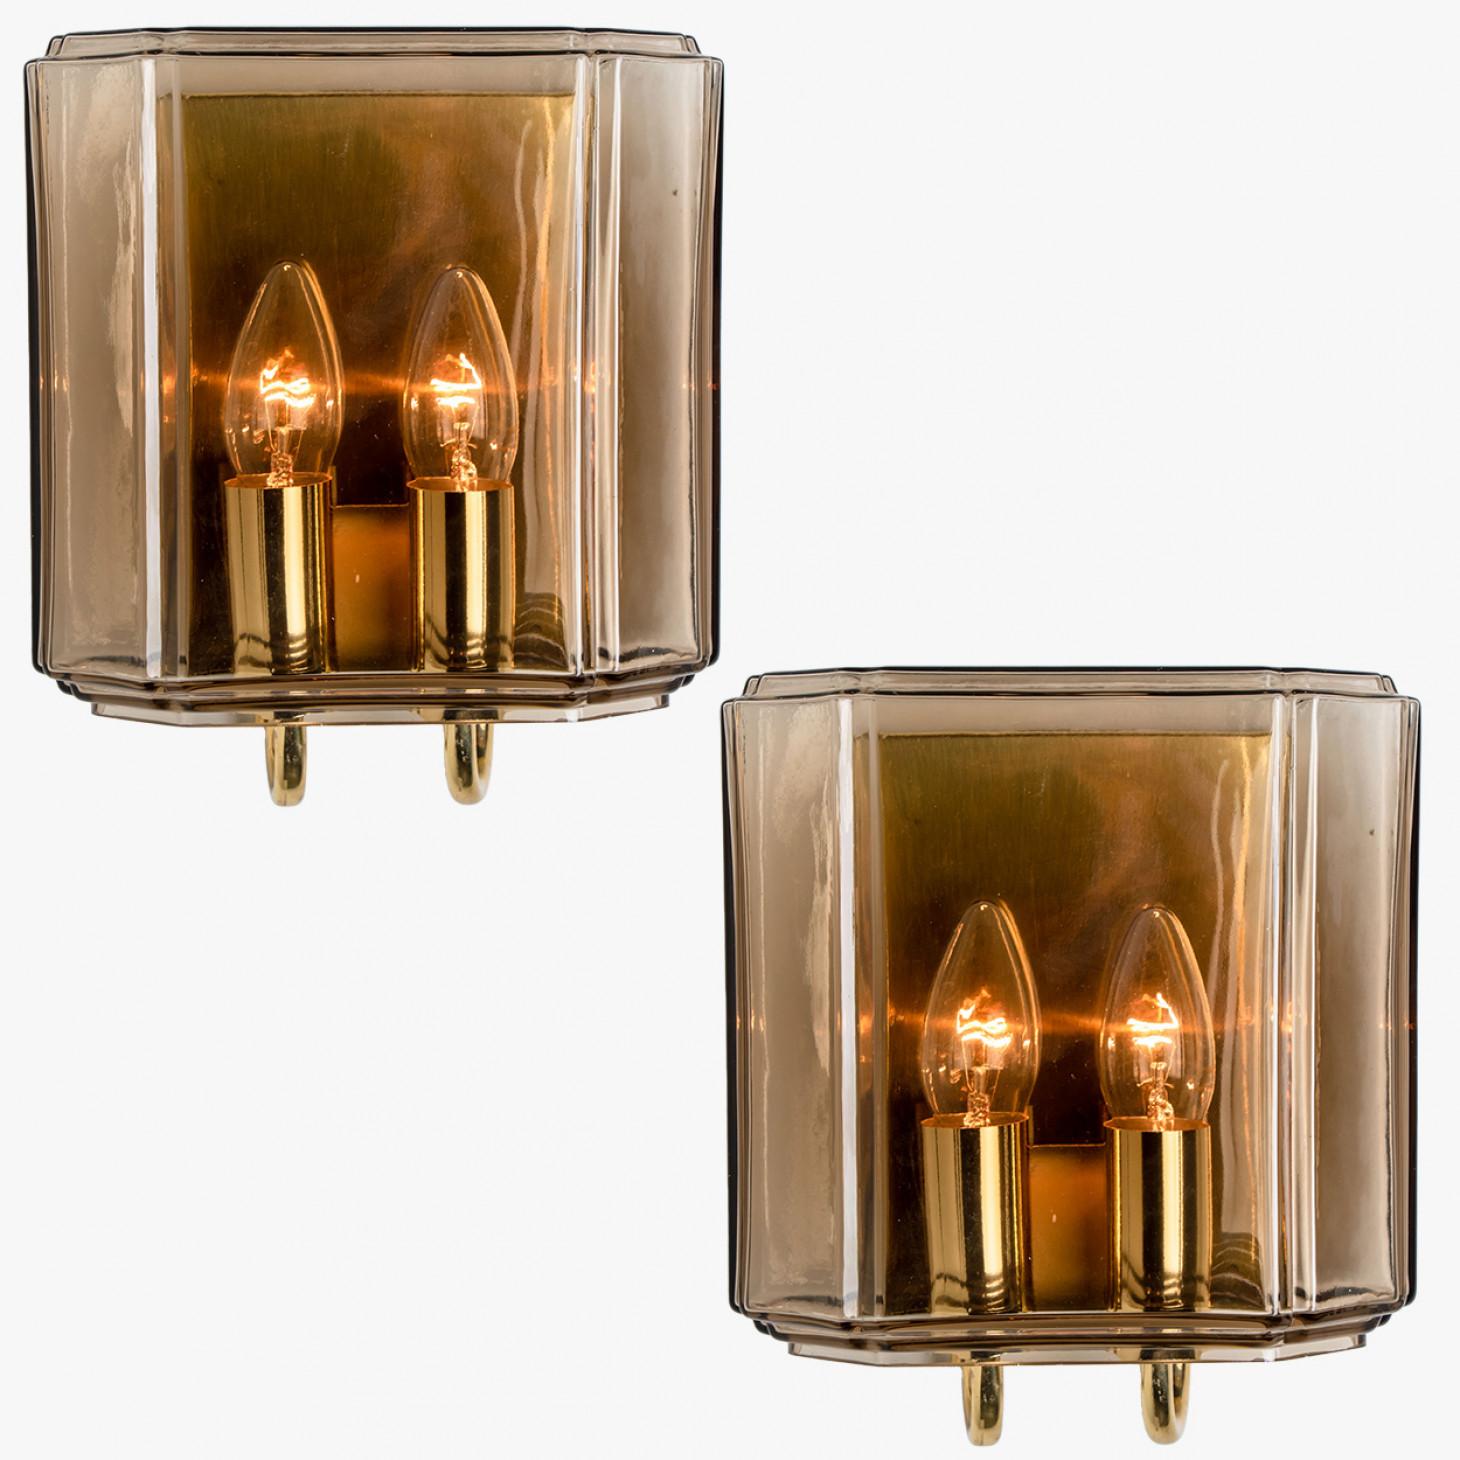 German One of the two Pairs of Smoked Glass Wall Lights Sconces by Glashütte Limburg, 1 For Sale